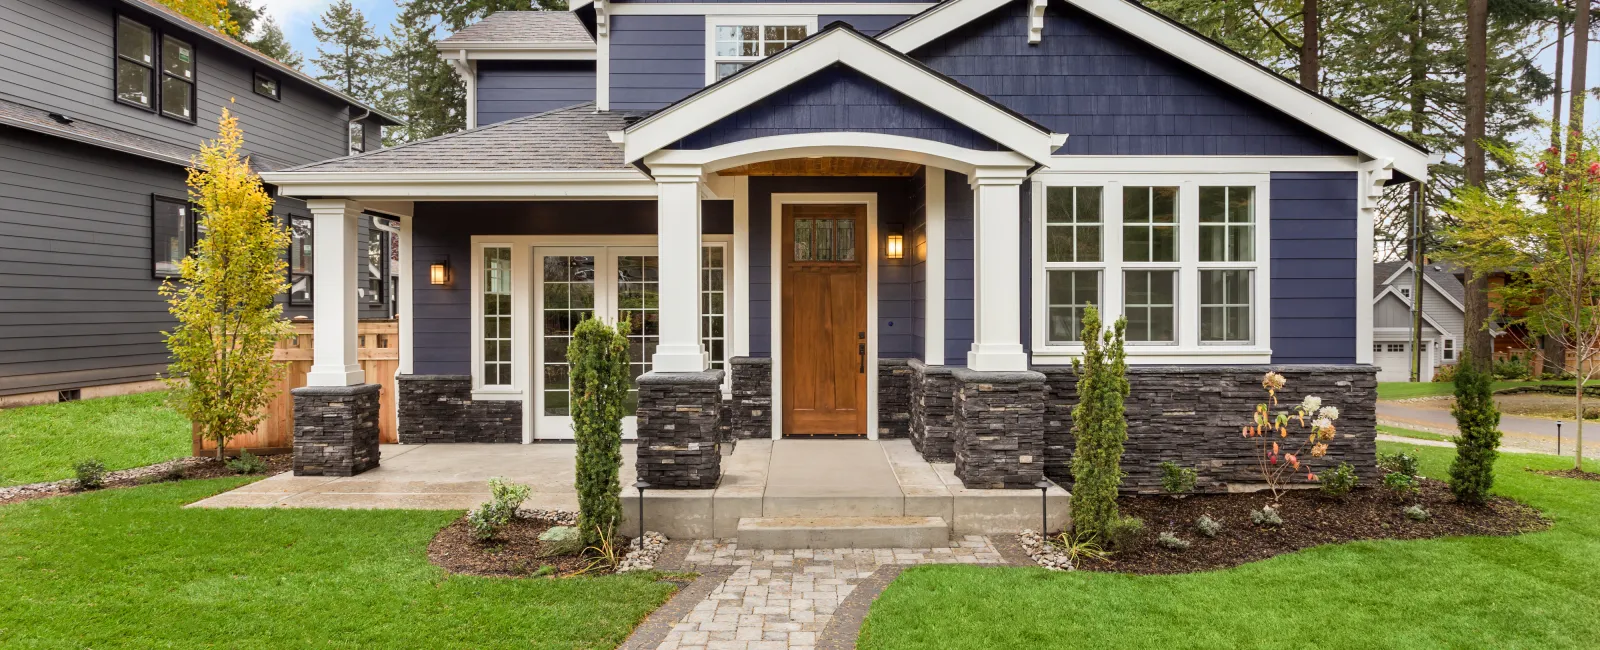 Your Home’s First Impression:
 Home Entry Doors